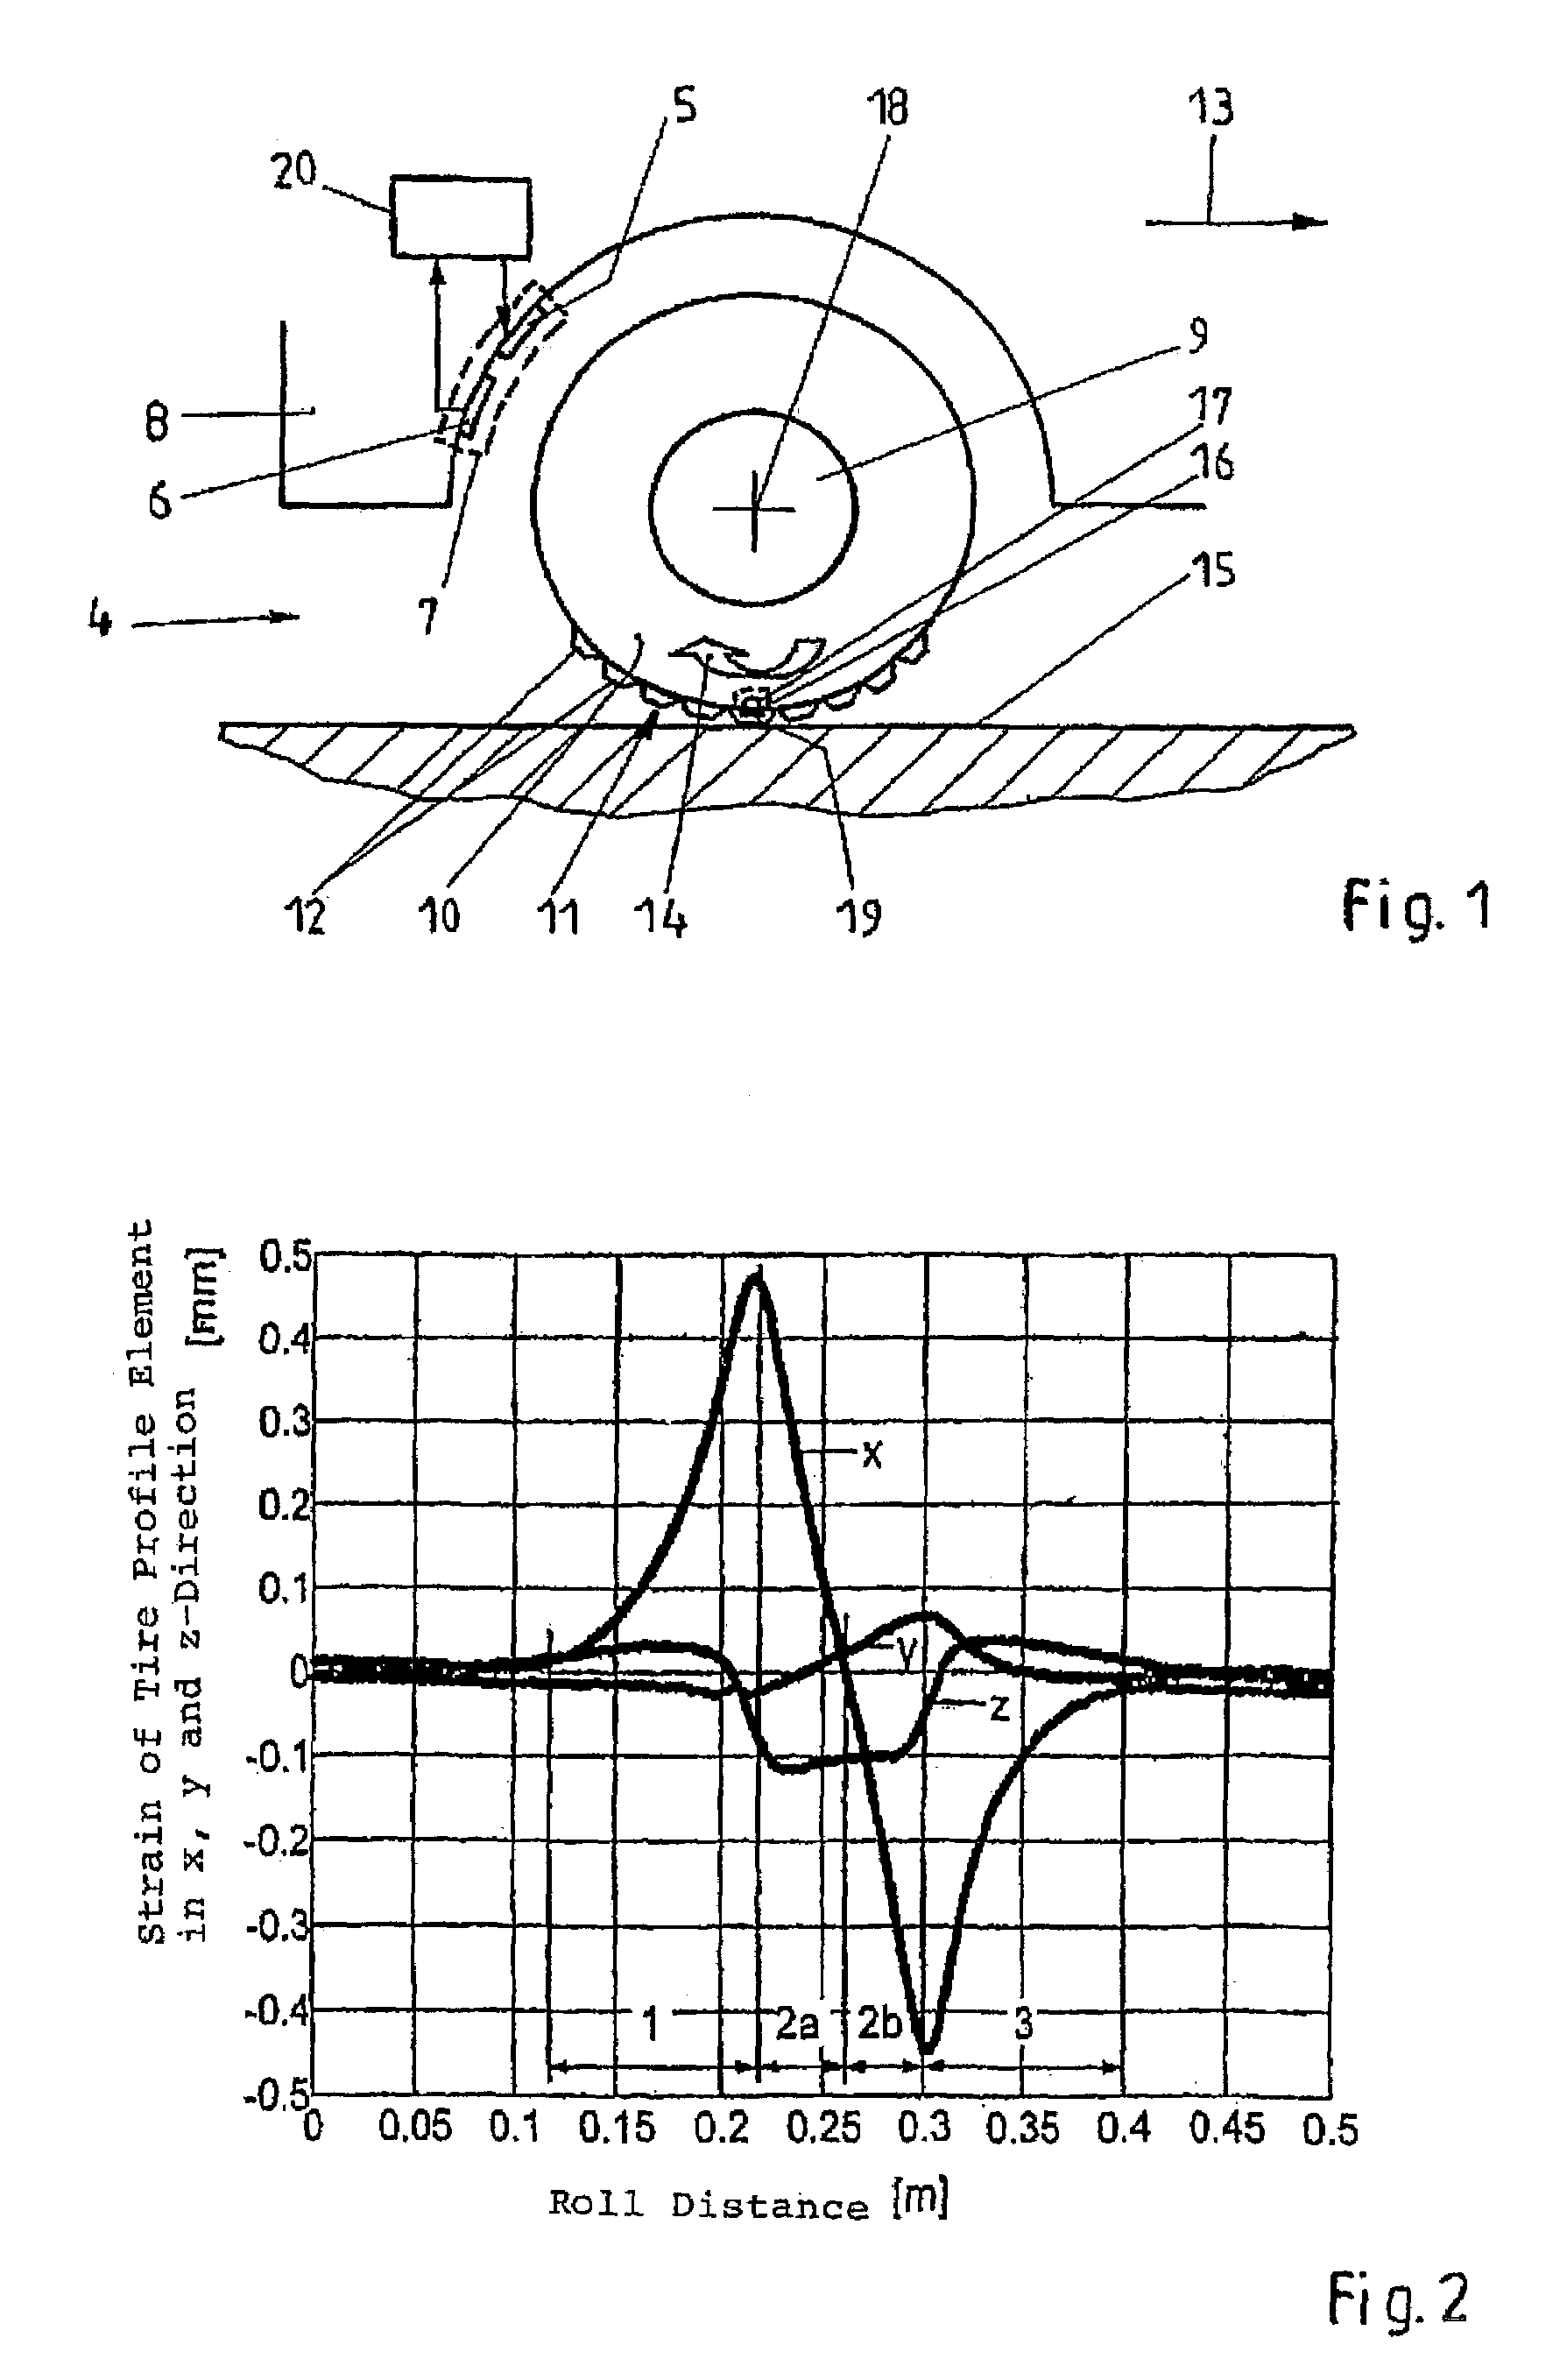 Method of and apparatus for acquiring data of dynamic physical processes via a radio link